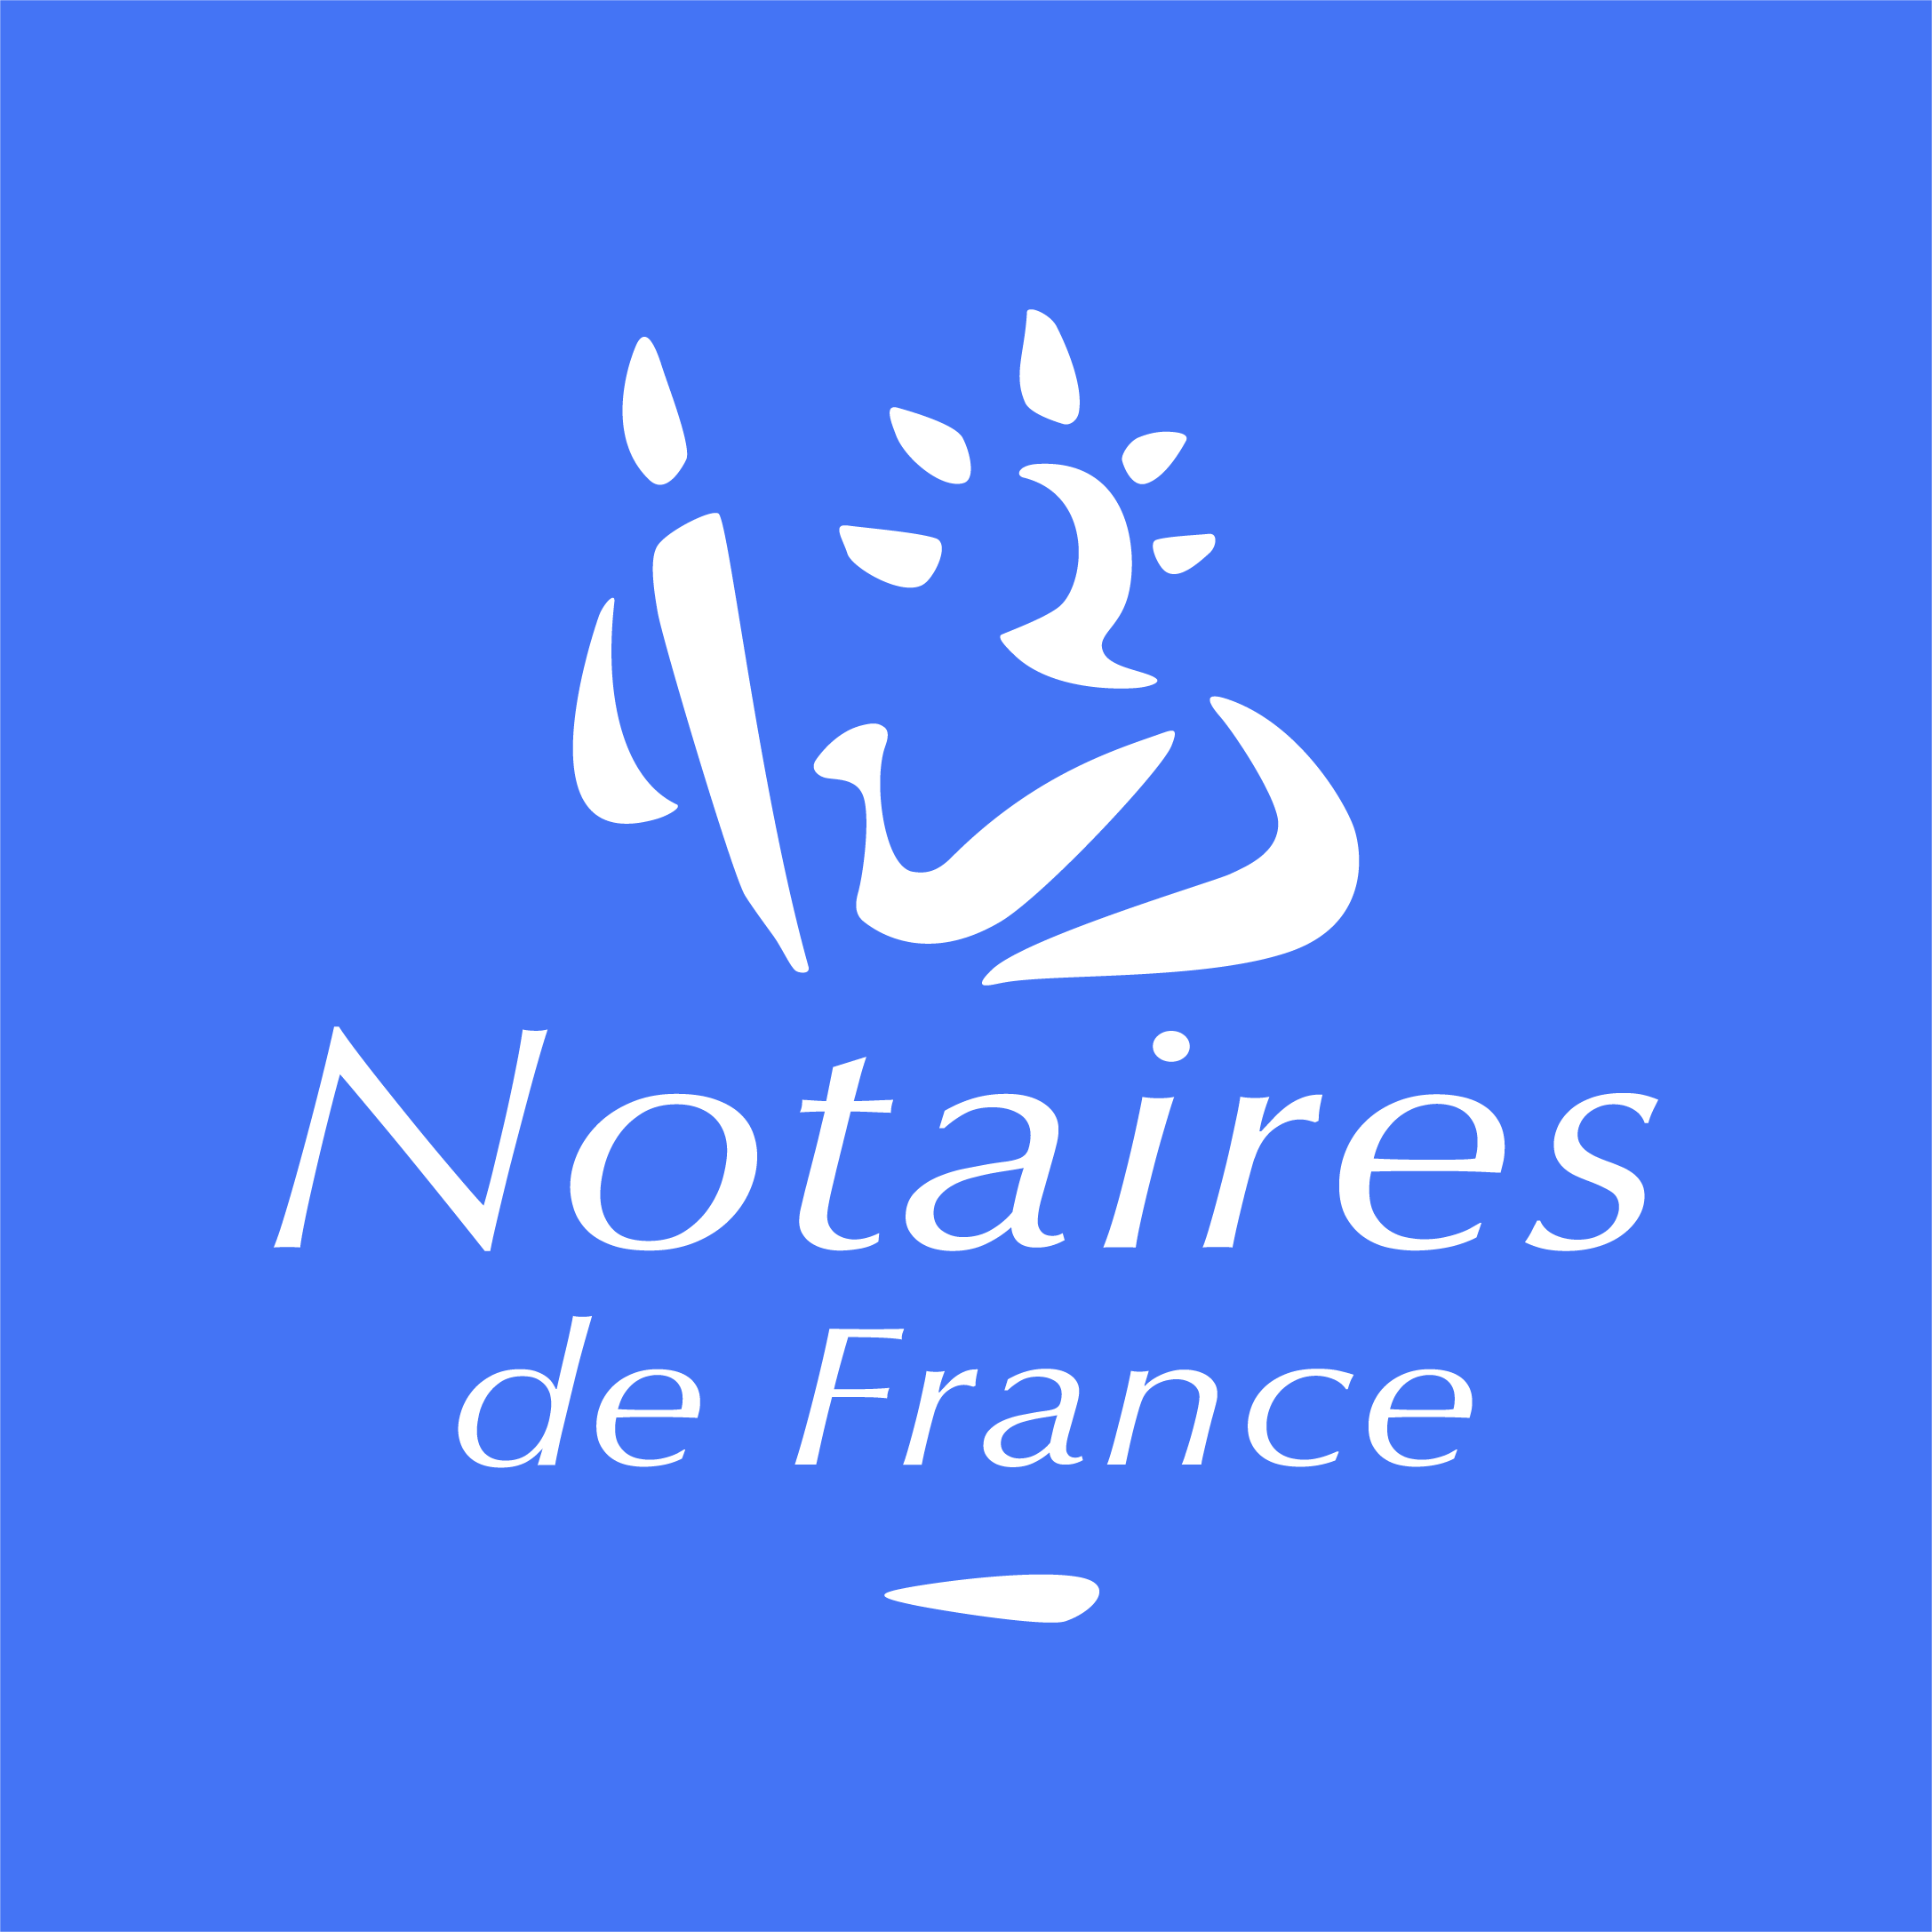 Welcome on the new website notaires.fr !